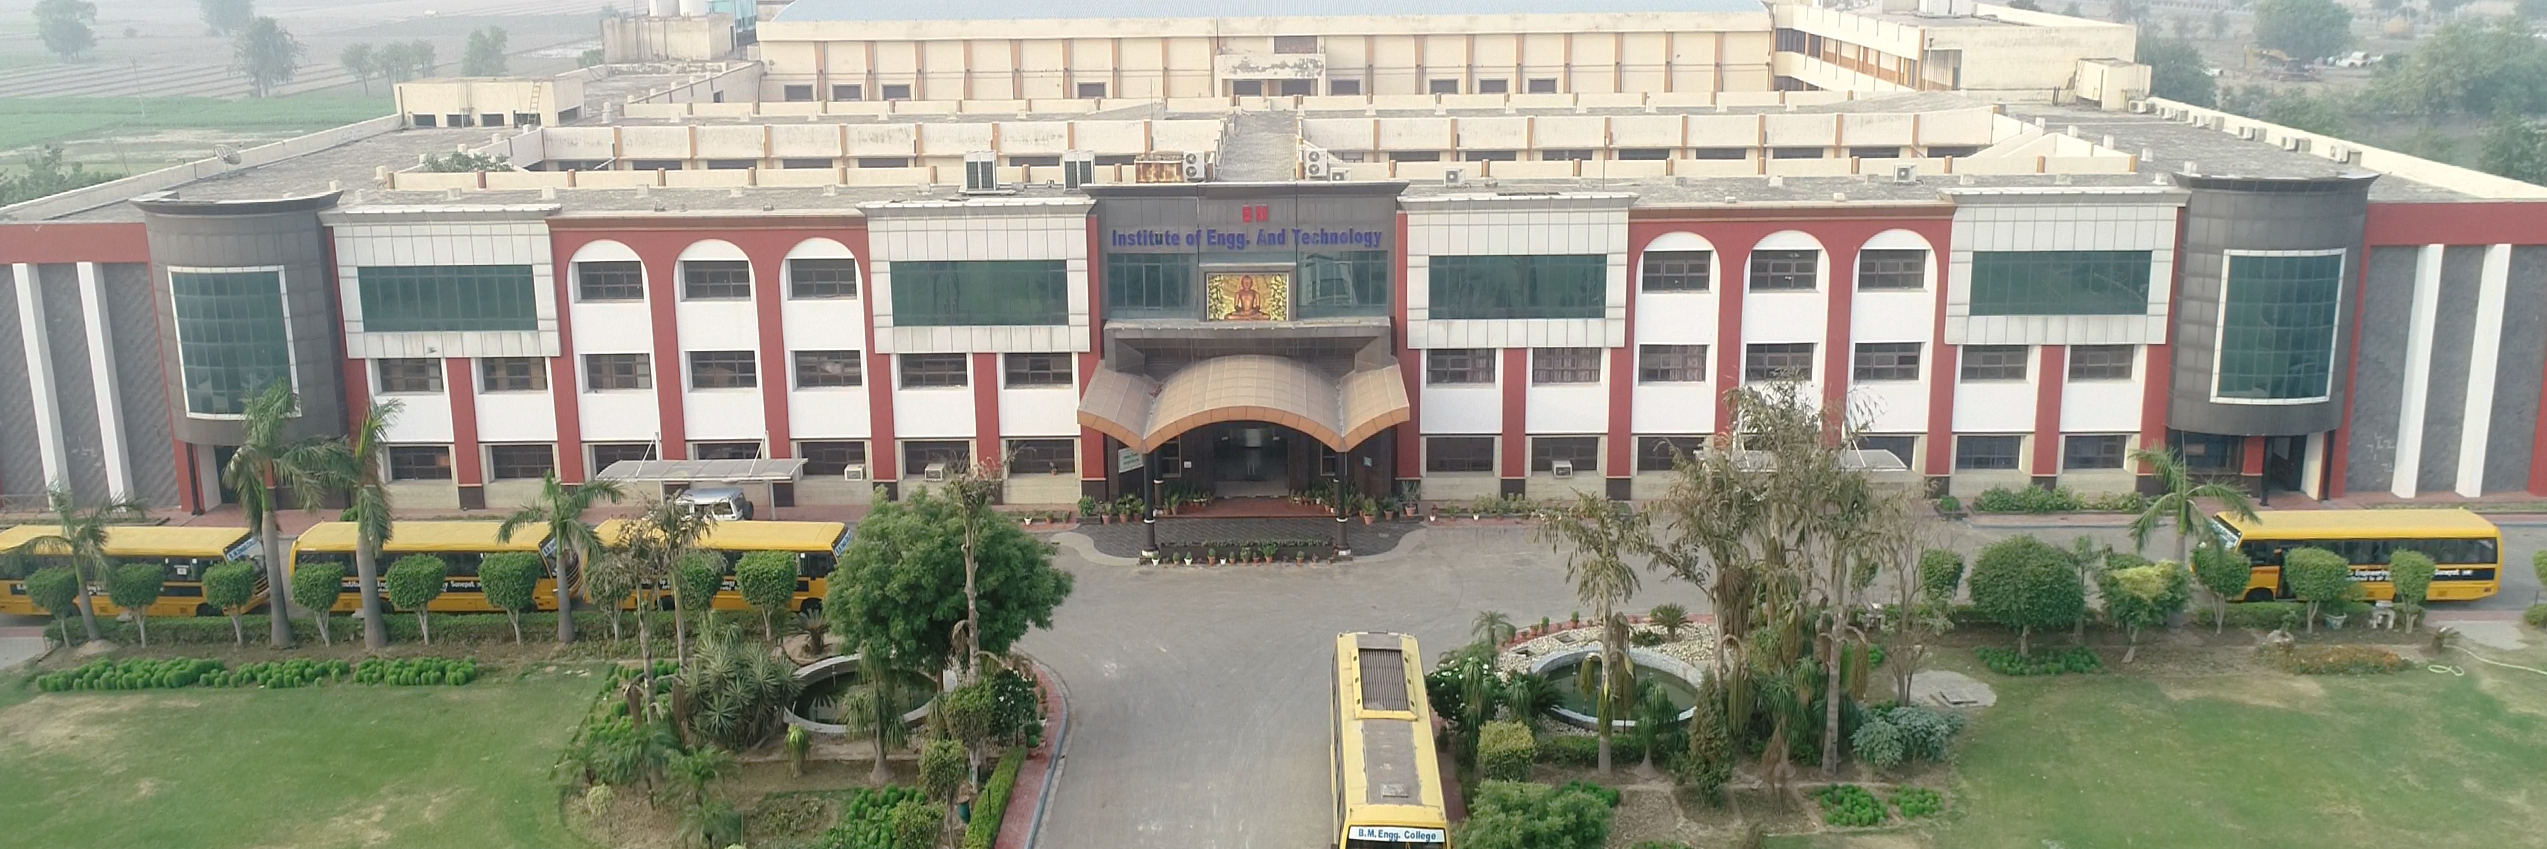 B. M. Institute of Engineering and Technology, Sonipat Image